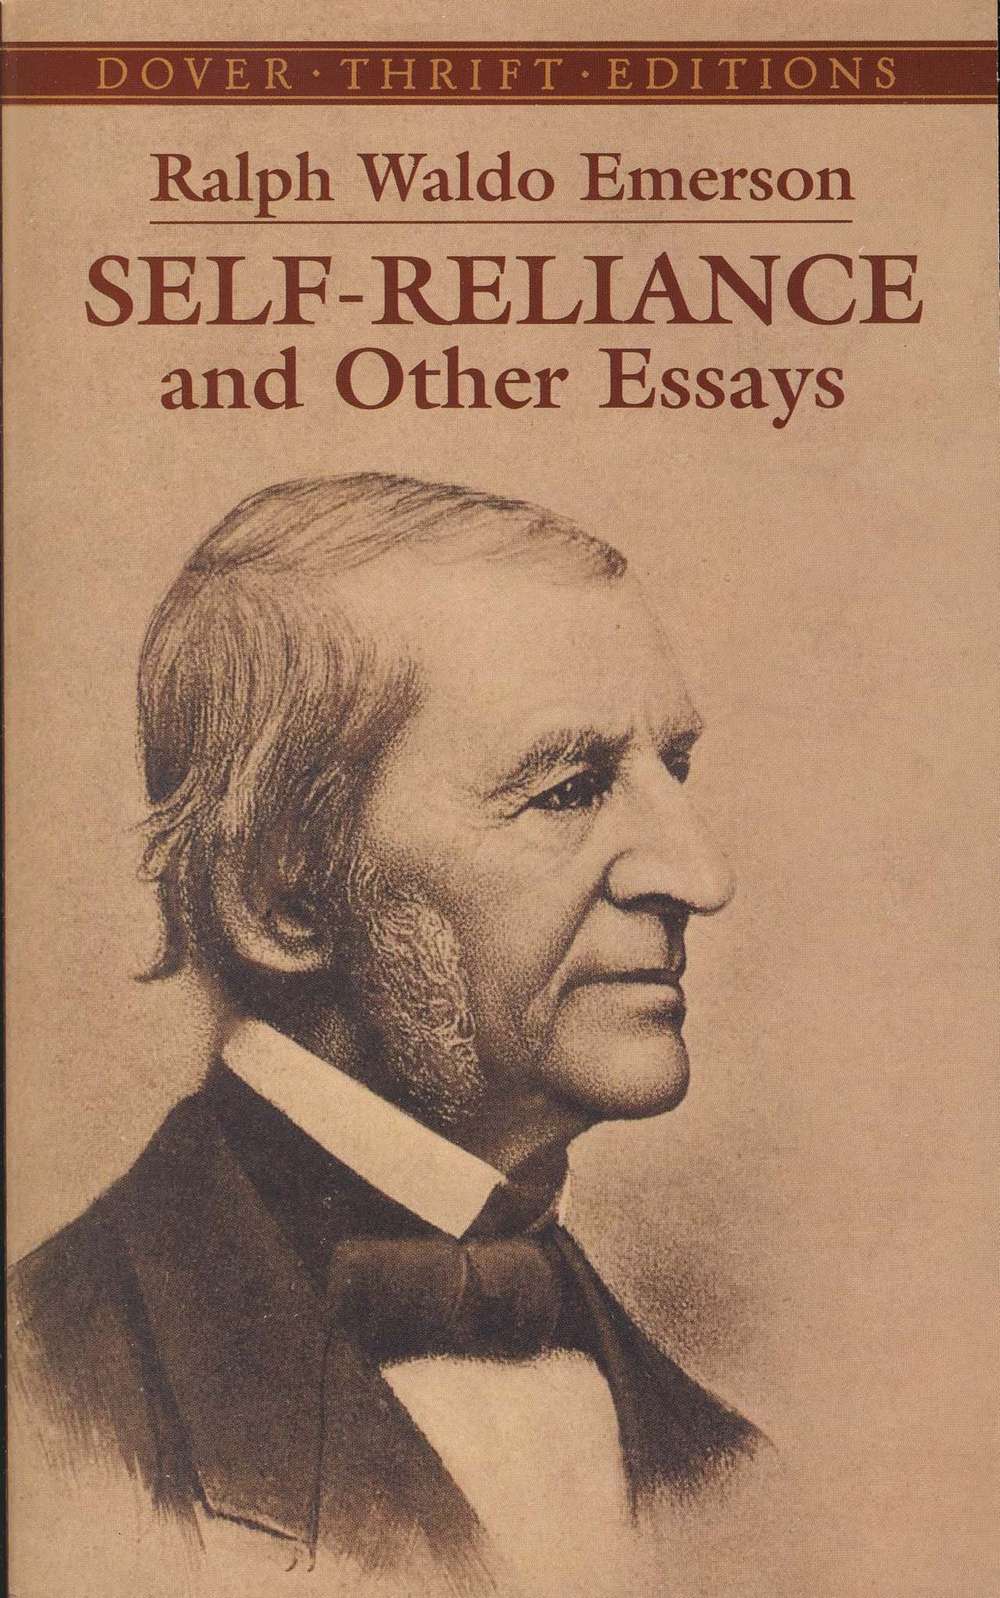 'Self-Reliance and Other Essays' by Ralph Waldo Emerson (ISBN 0486277909)